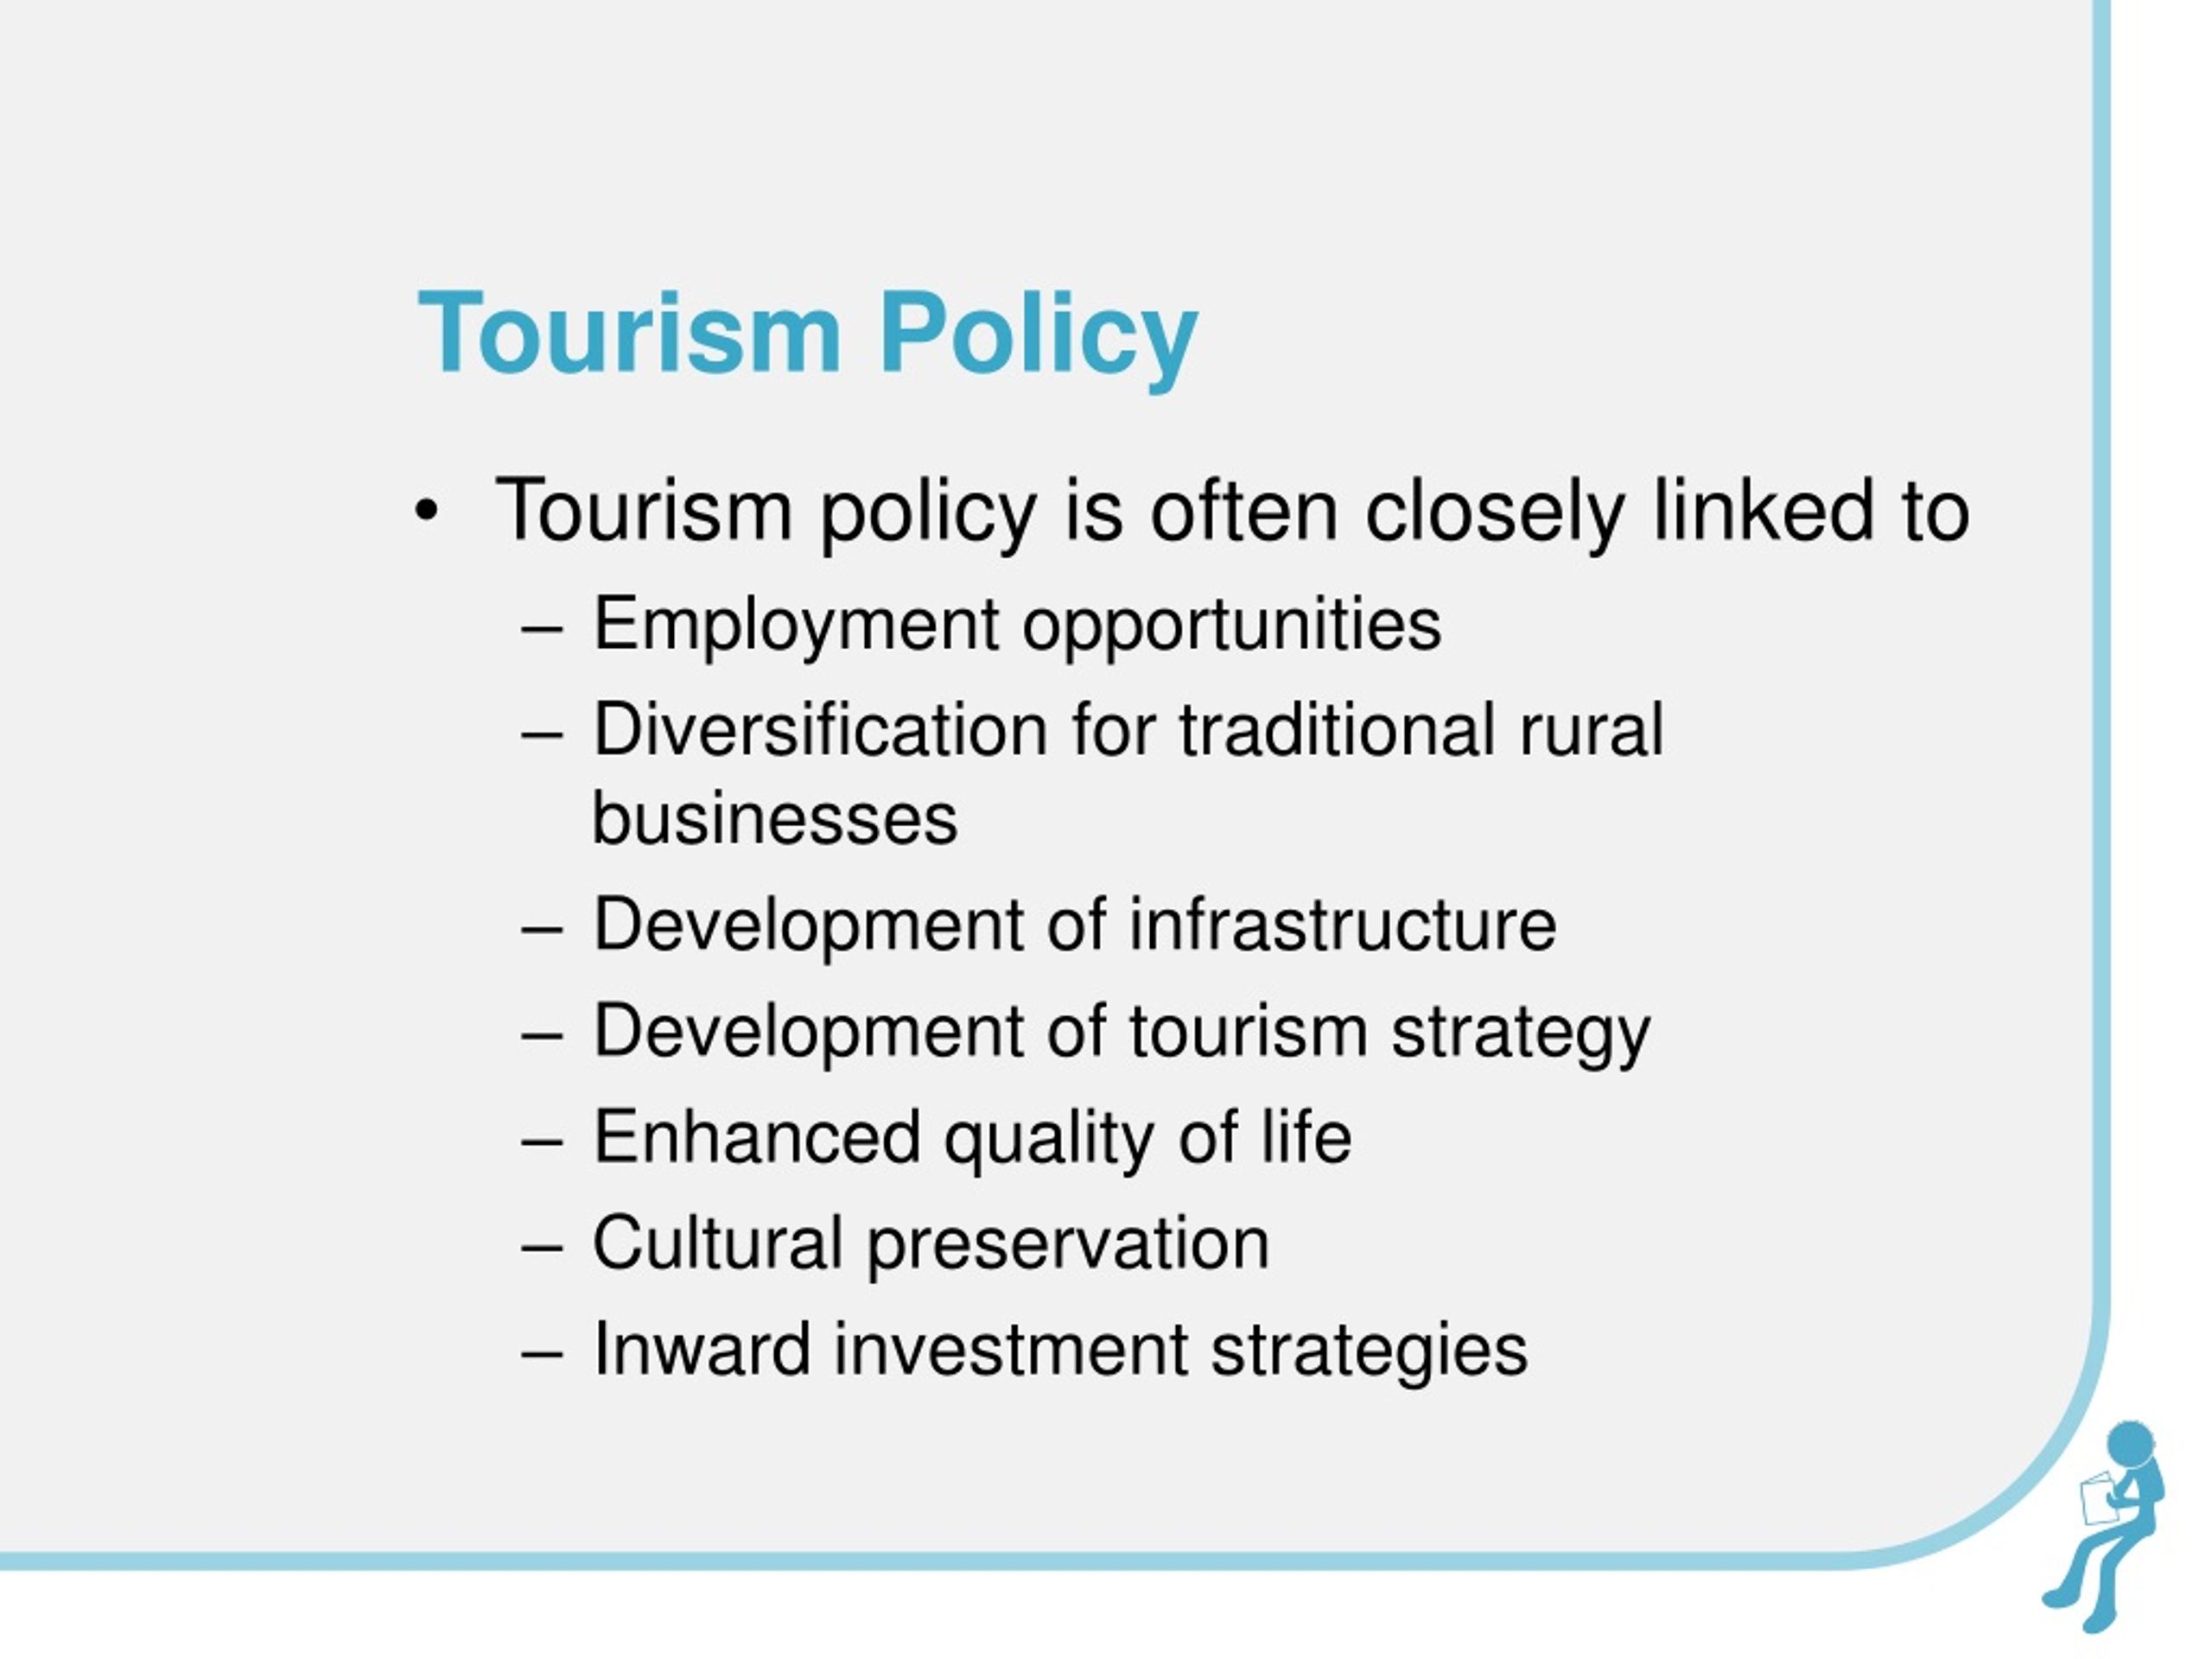 tourism development meaning